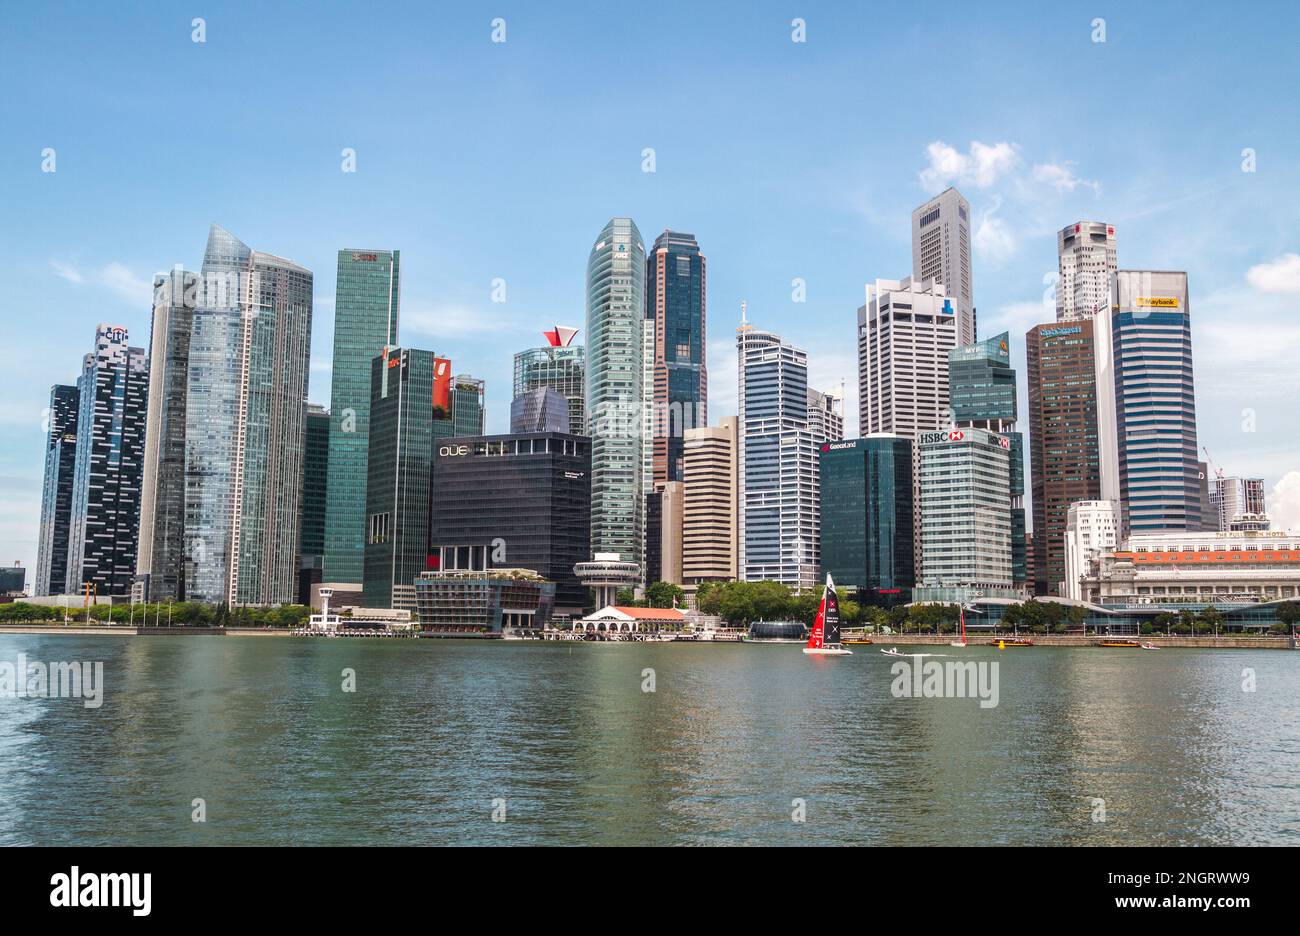 Skyscrapers of the Singapore Financial District. Downtown Core skyline, Singapore's Central Business District CBD. Stock Photo